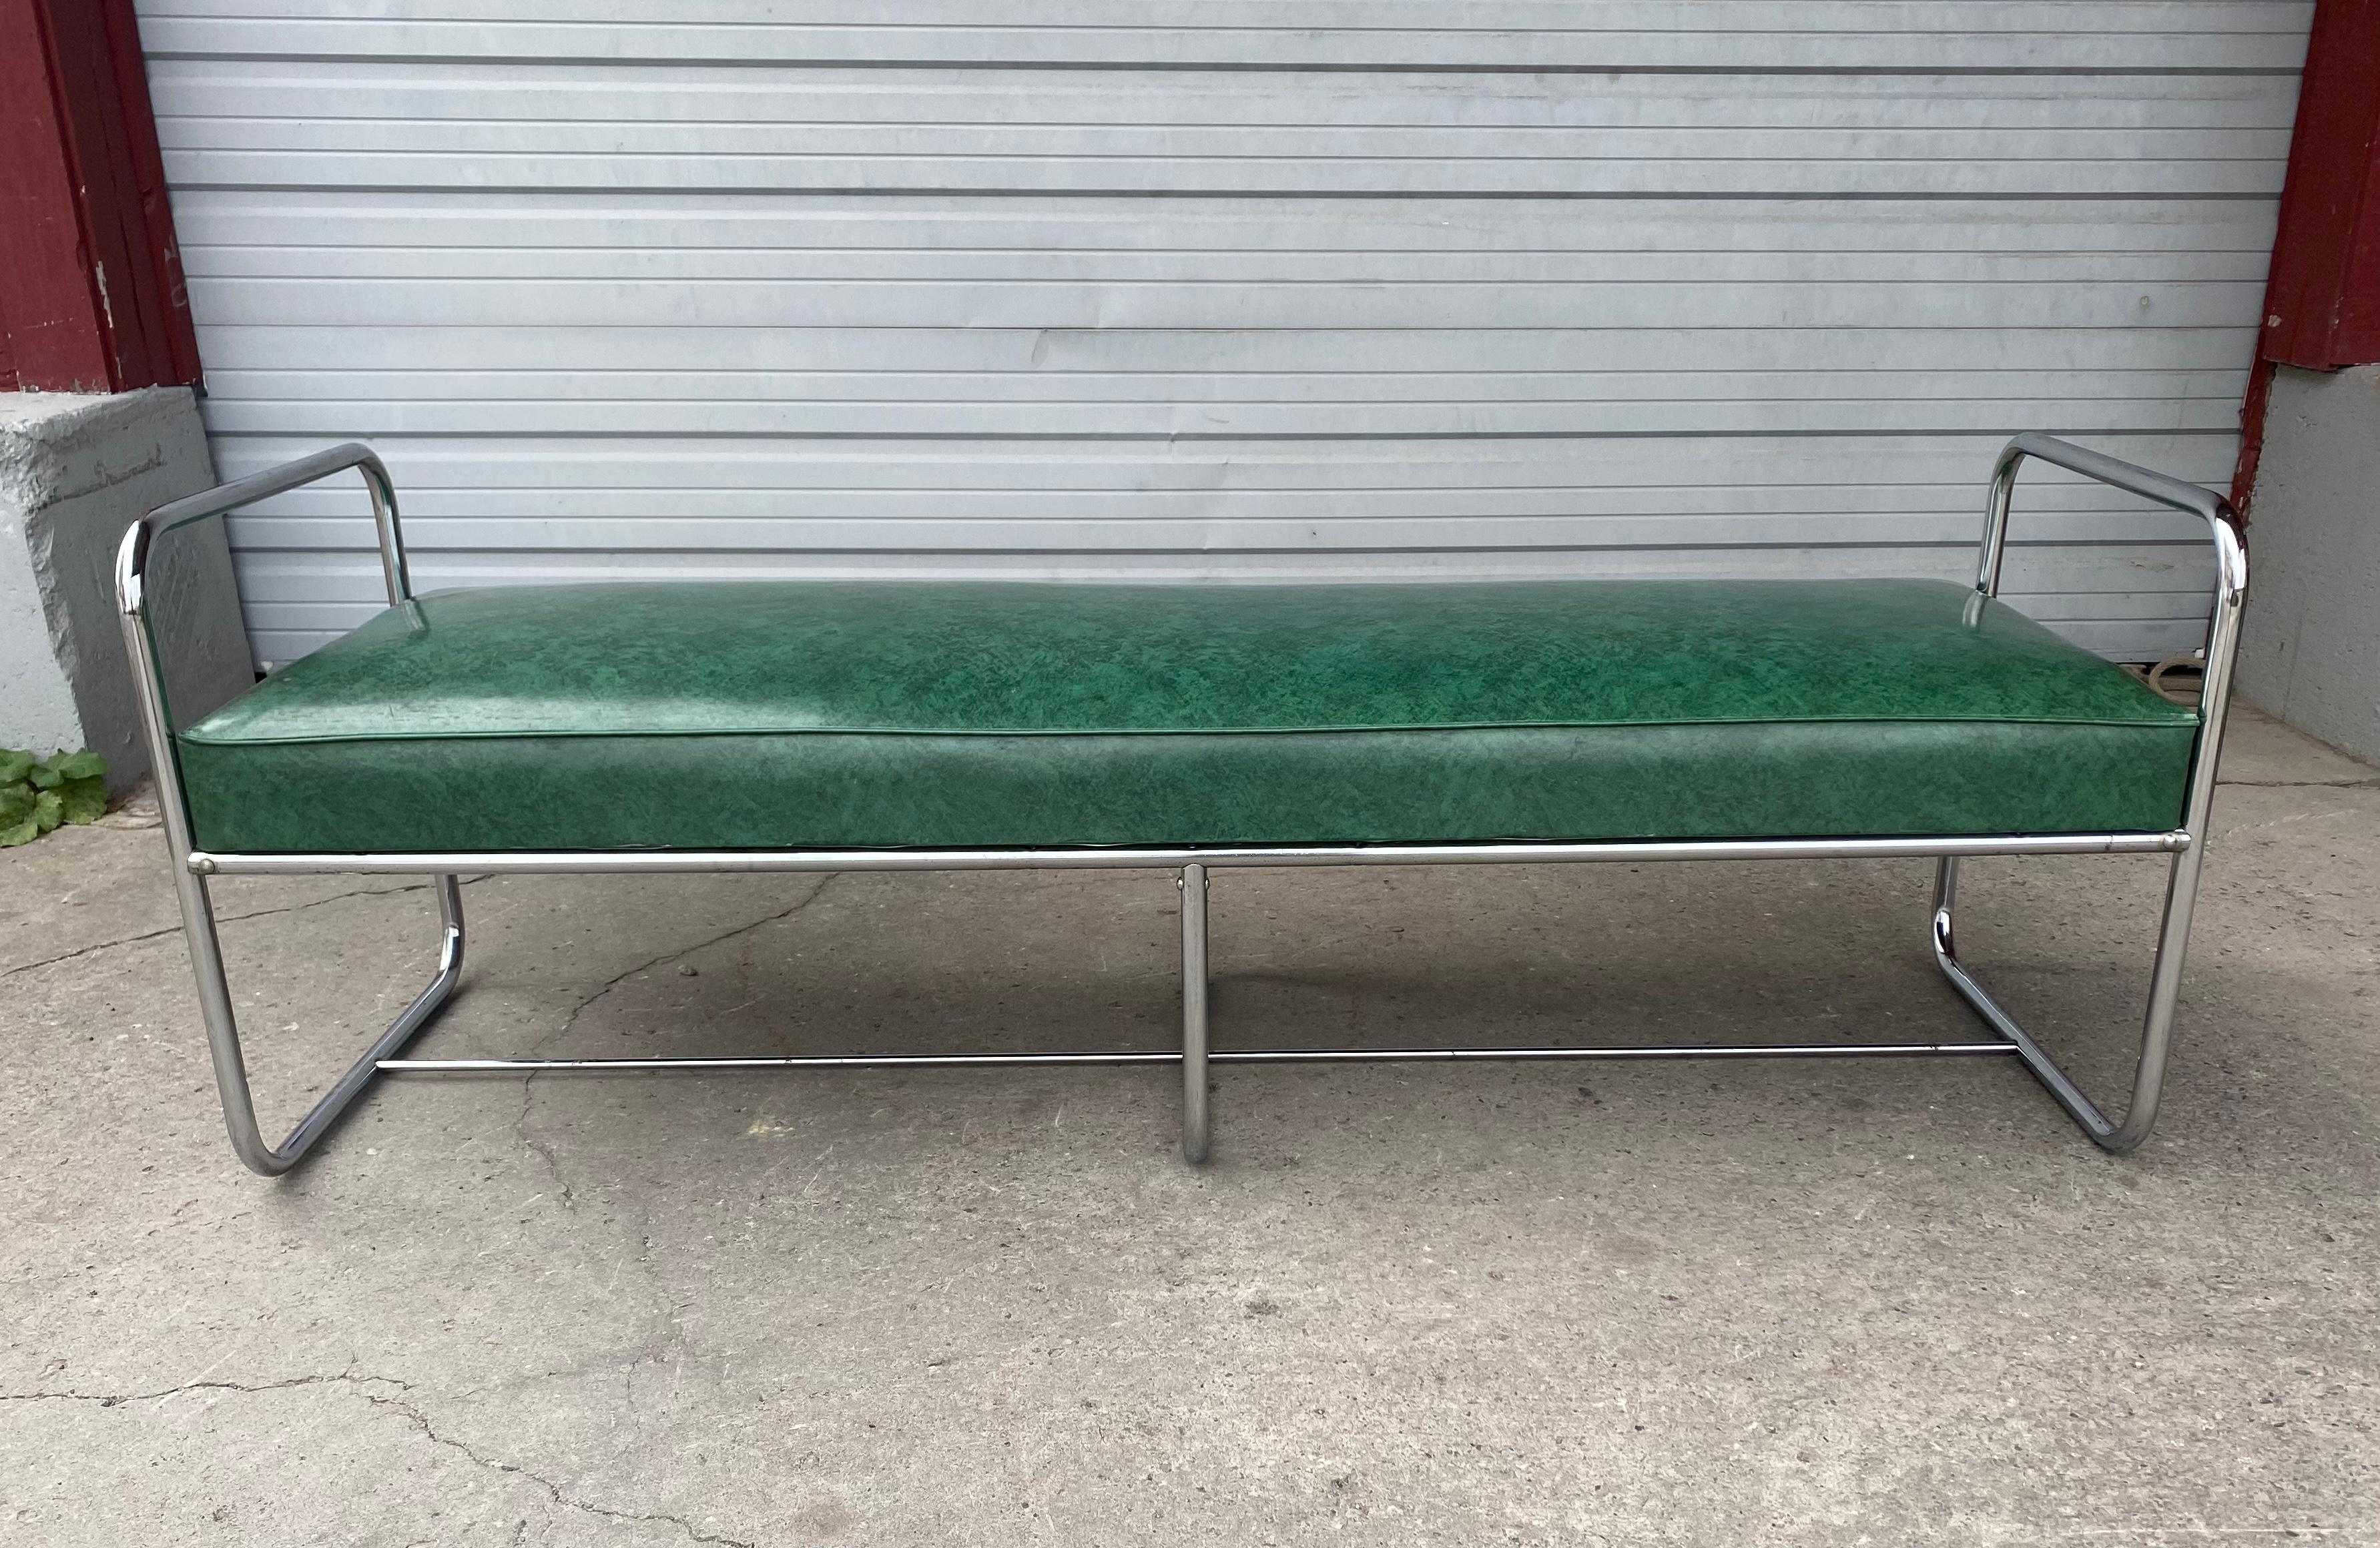 Classic Art Deco / Bauhaus style Tubular chrome bench designed by Wolfgang Hoffmann for Howell, chrome in great original condition, reupholstered (most likely in the 1950's-60's) in green naugahyde, chrome frame arms measure 24